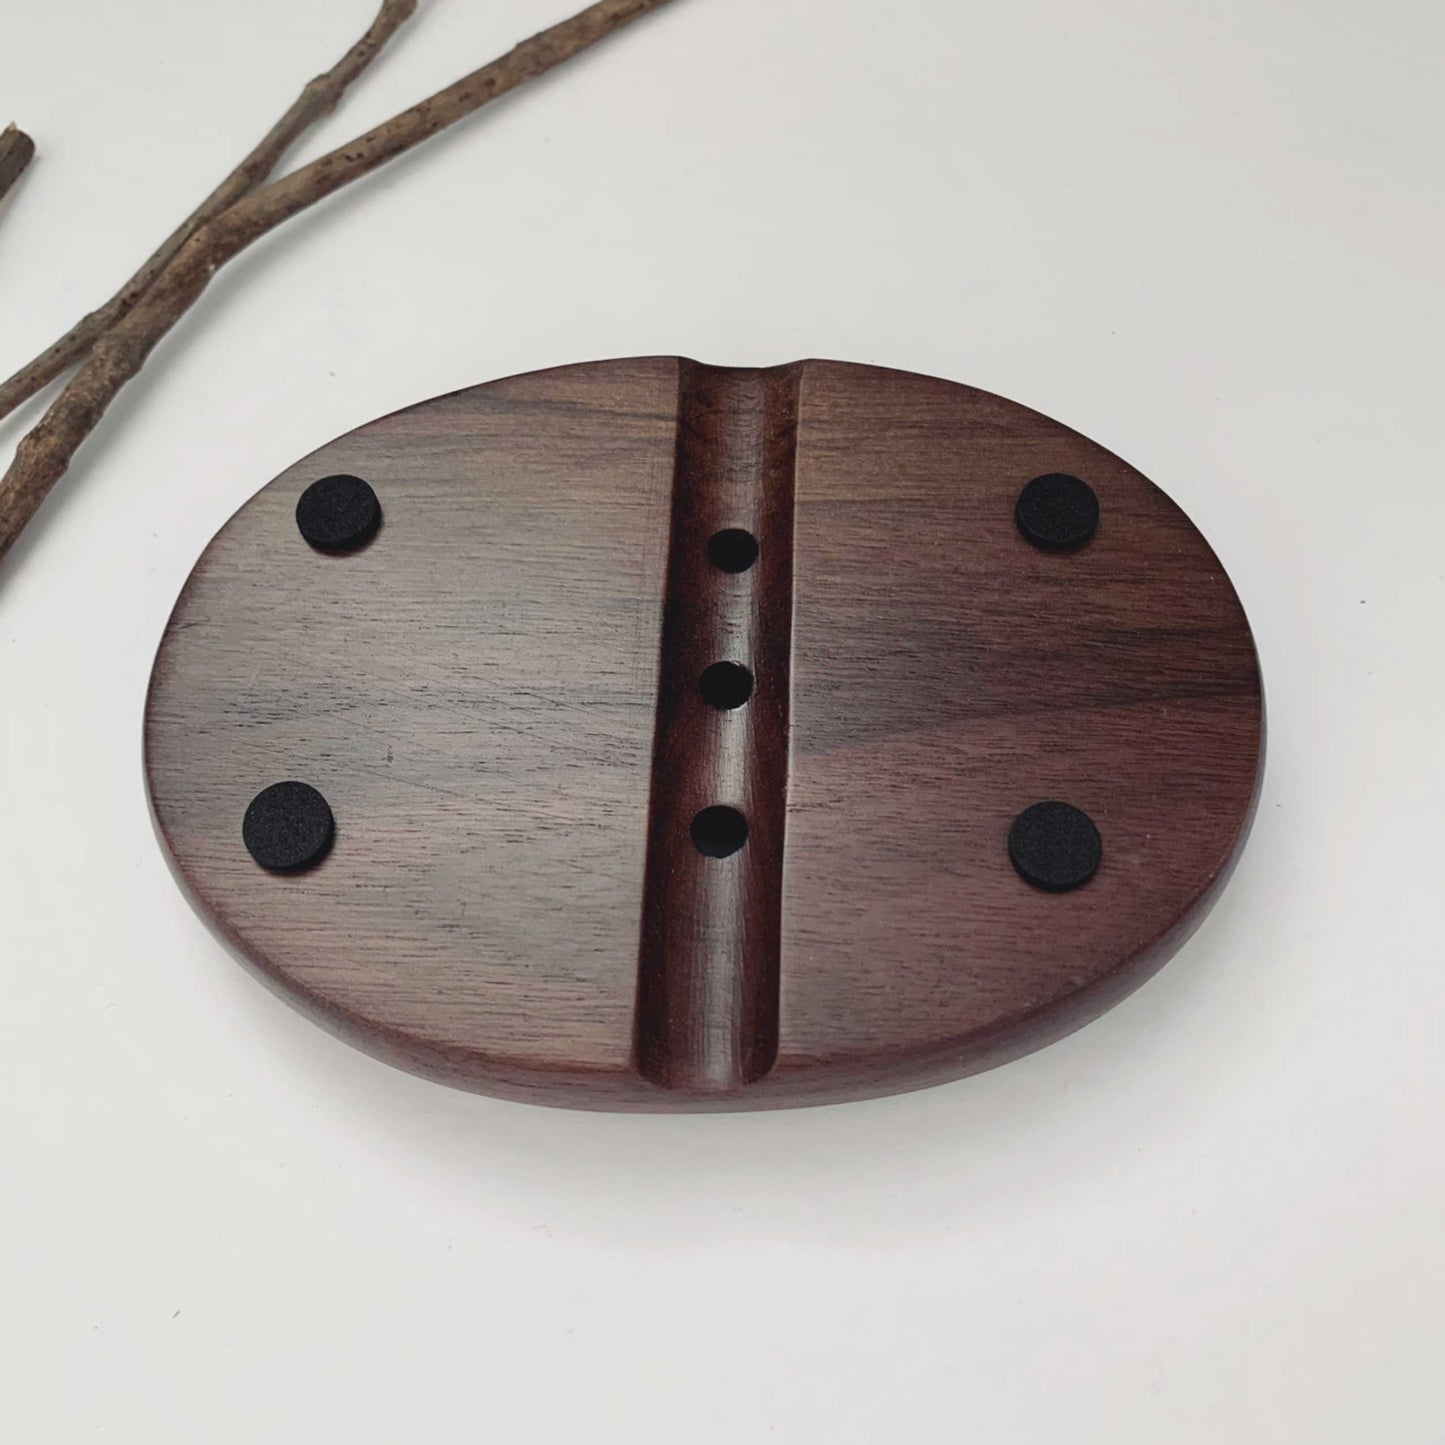 Handcrafted Solid Walnut Wood Soap Dish Oval